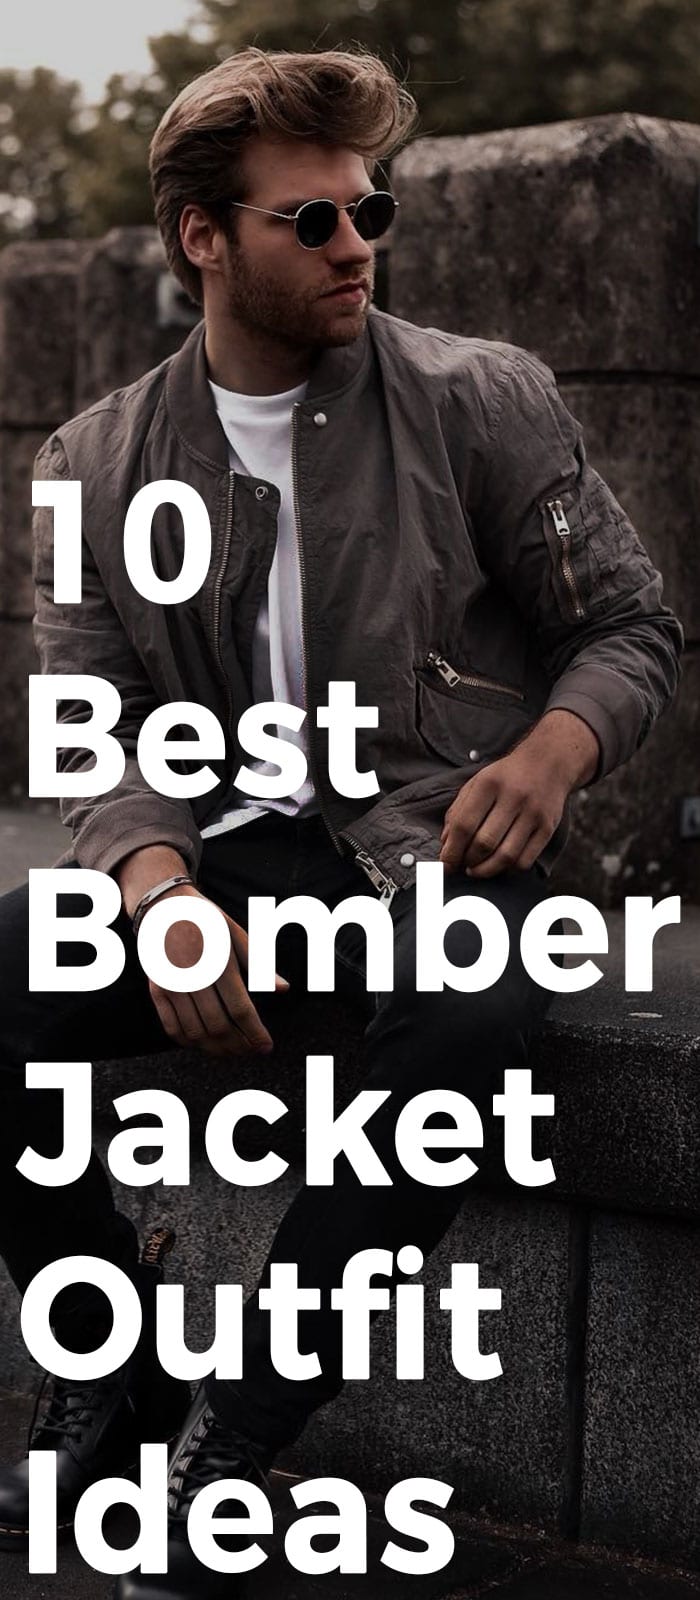 10 Best Bomber Jacket Outfit Ideas